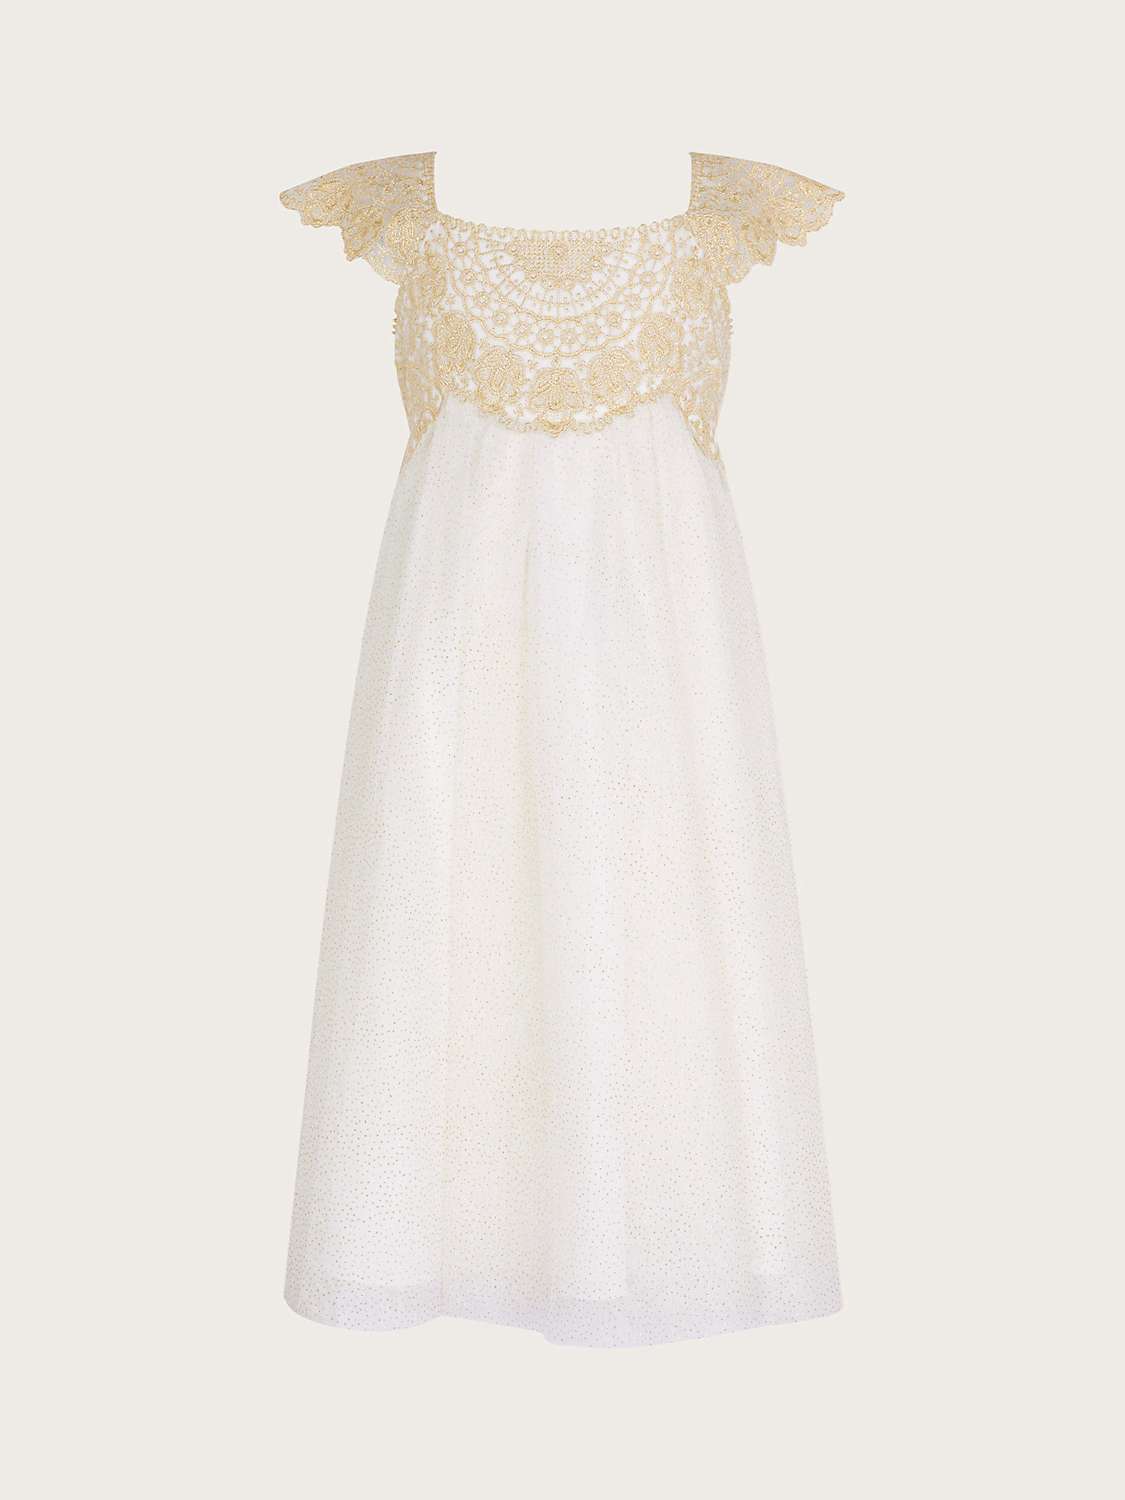 Buy Monsoon Kids' Estella Lace Embroidered Glitter Party Dress, Gold Online at johnlewis.com